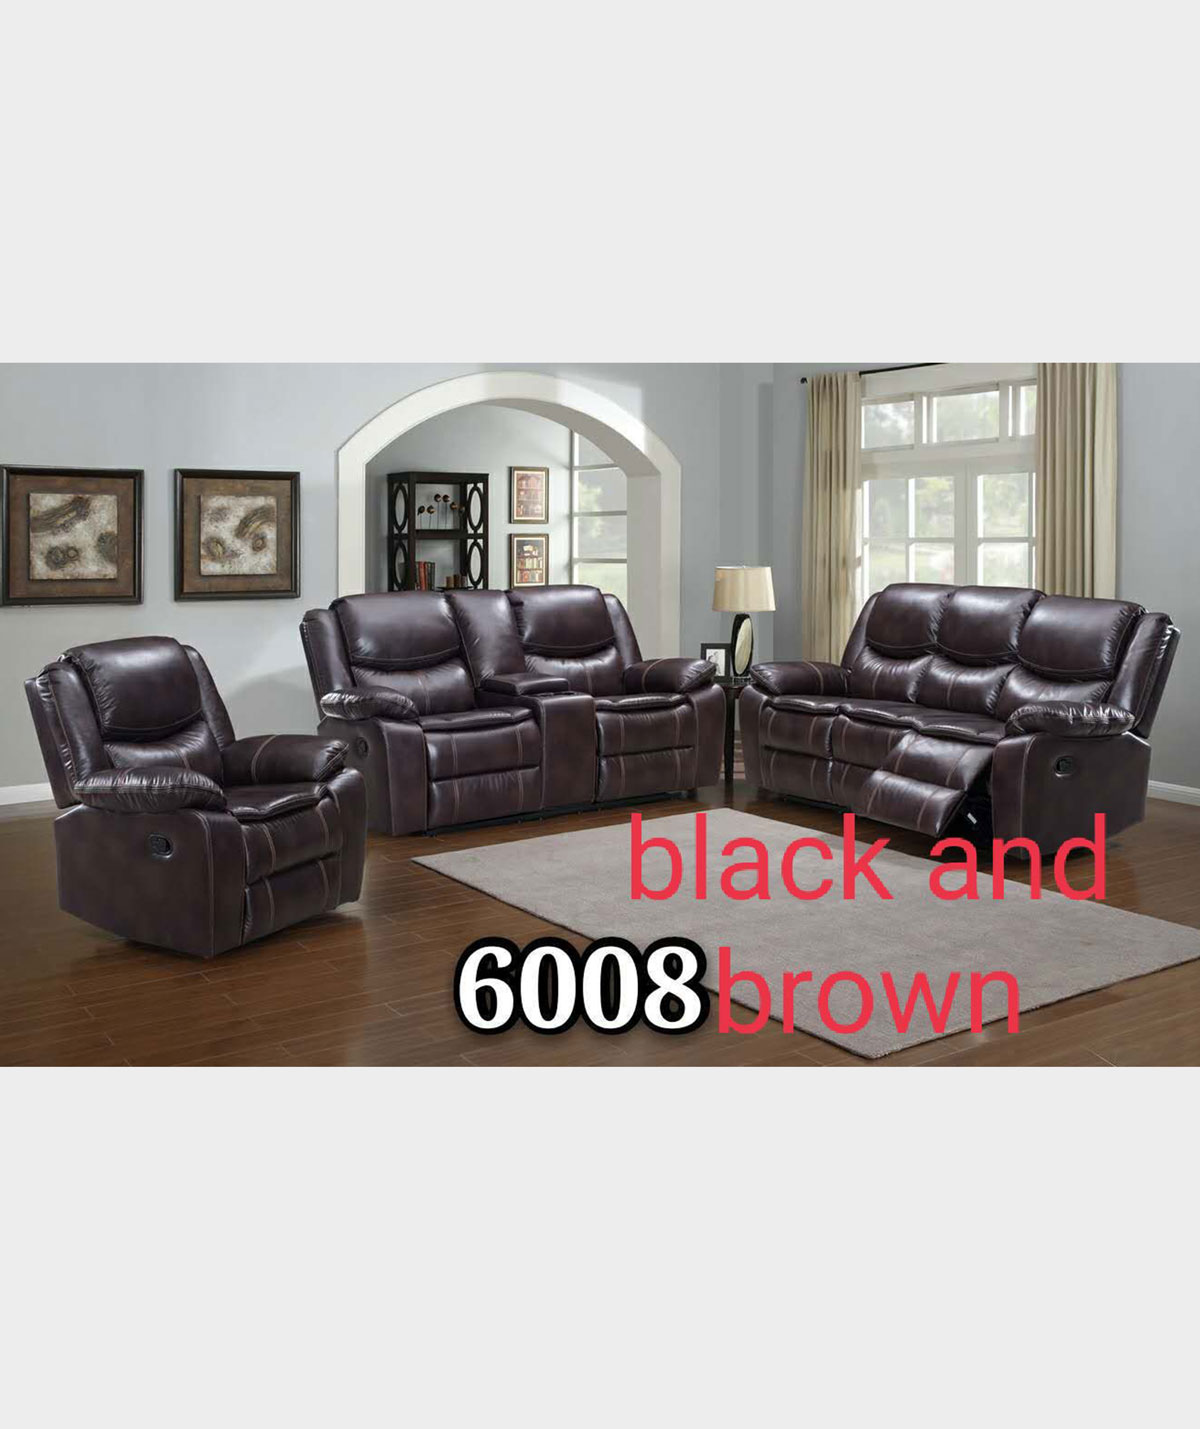 London Recliner Couch Set